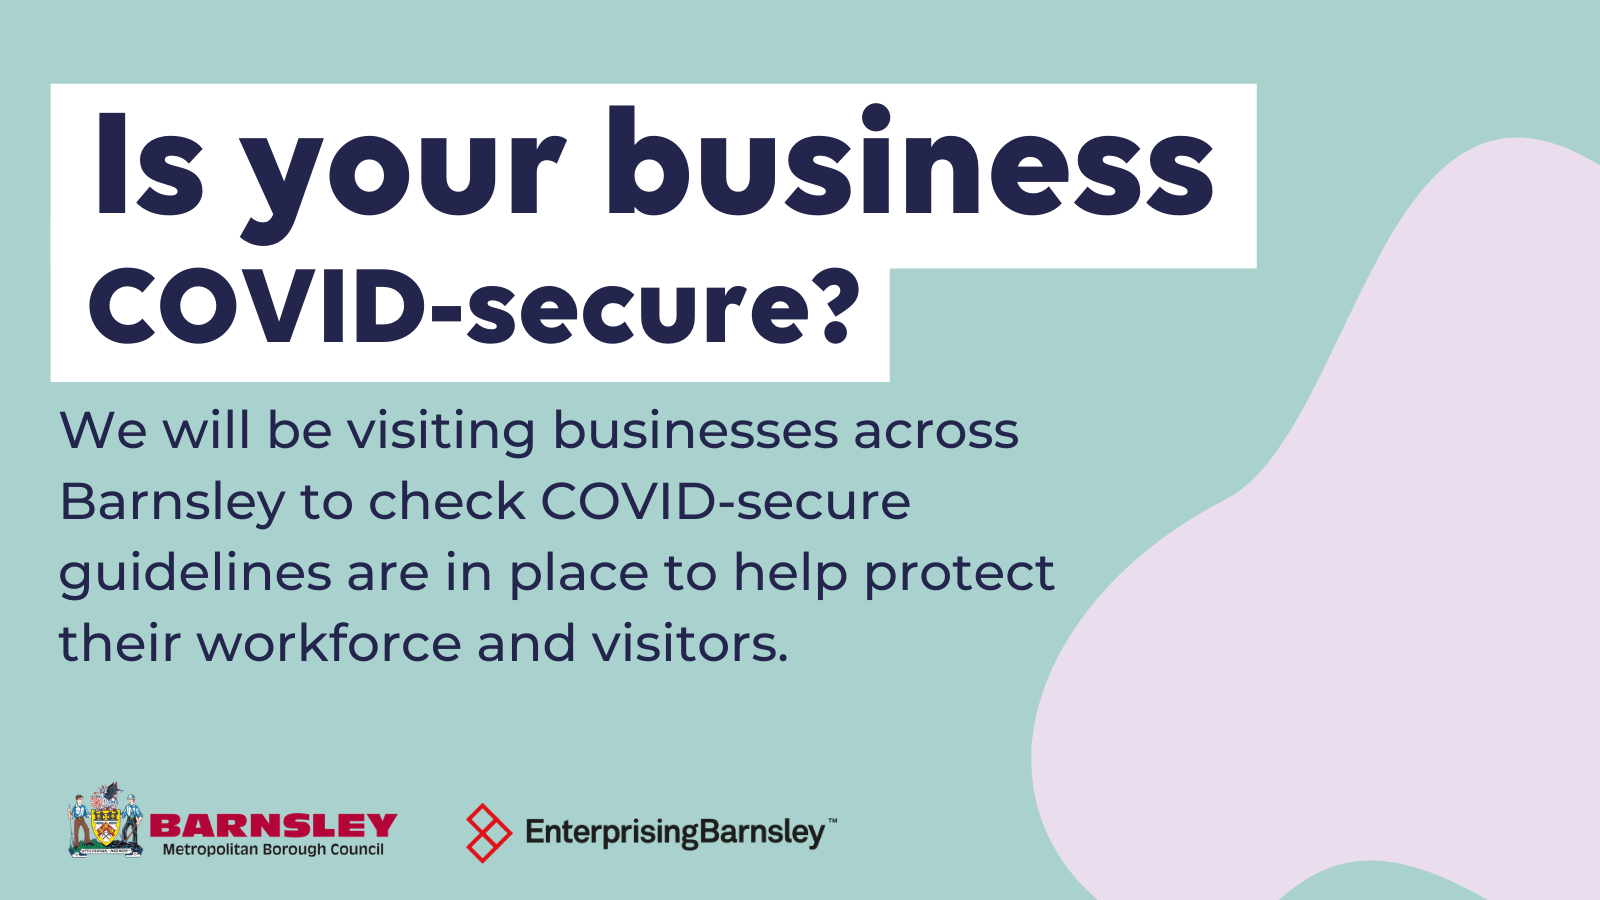 Is your business COVID-secure. We will be visiting businesses across Barnsley to check COVID-secure guidelines are in place to help protect their workforce and visitors